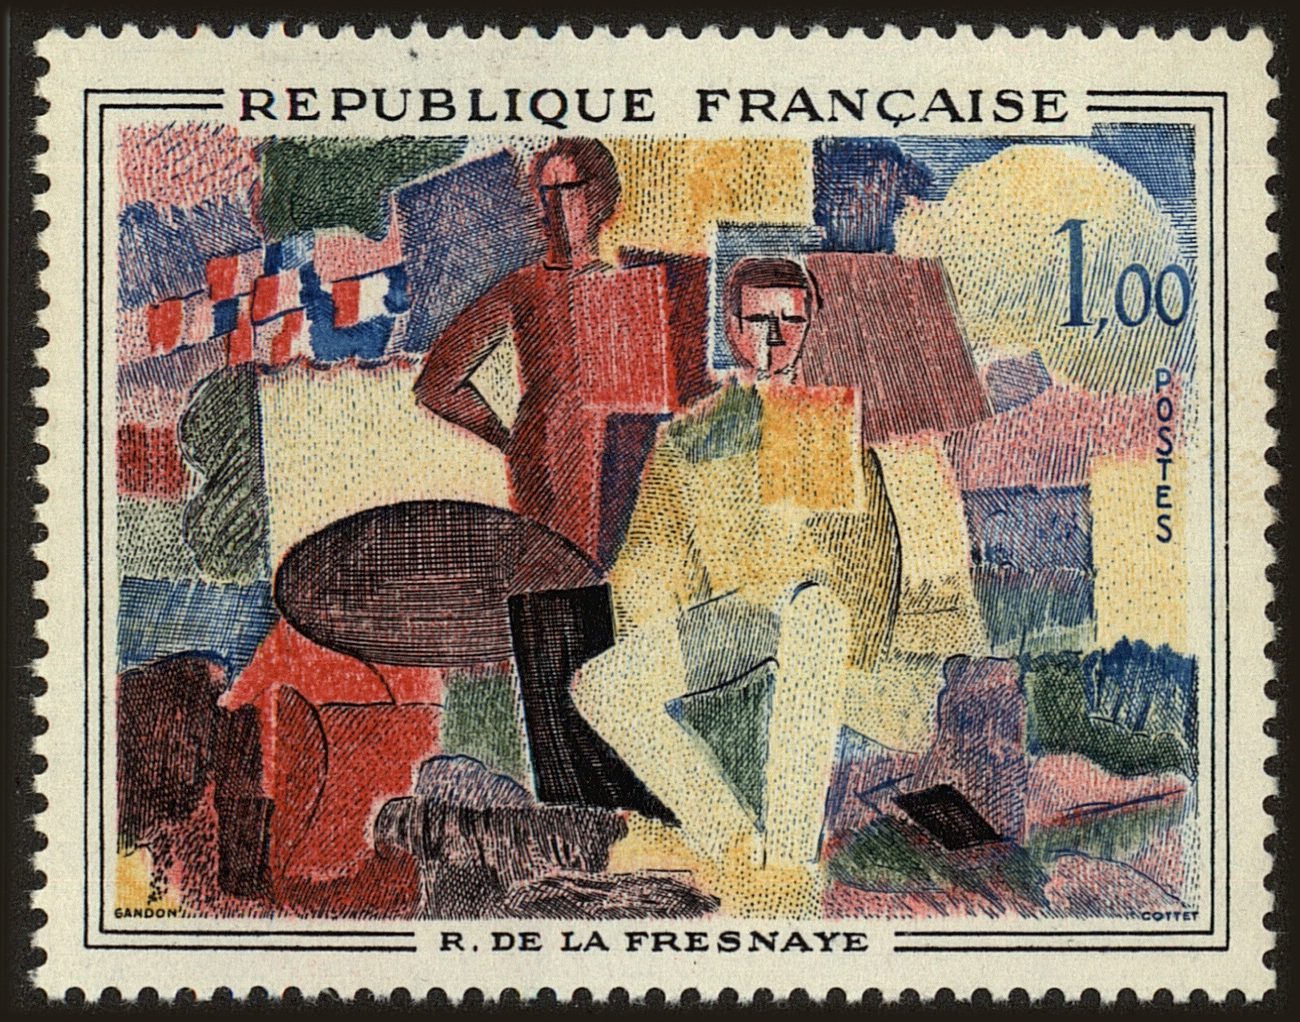 Front view of France 1017 collectors stamp